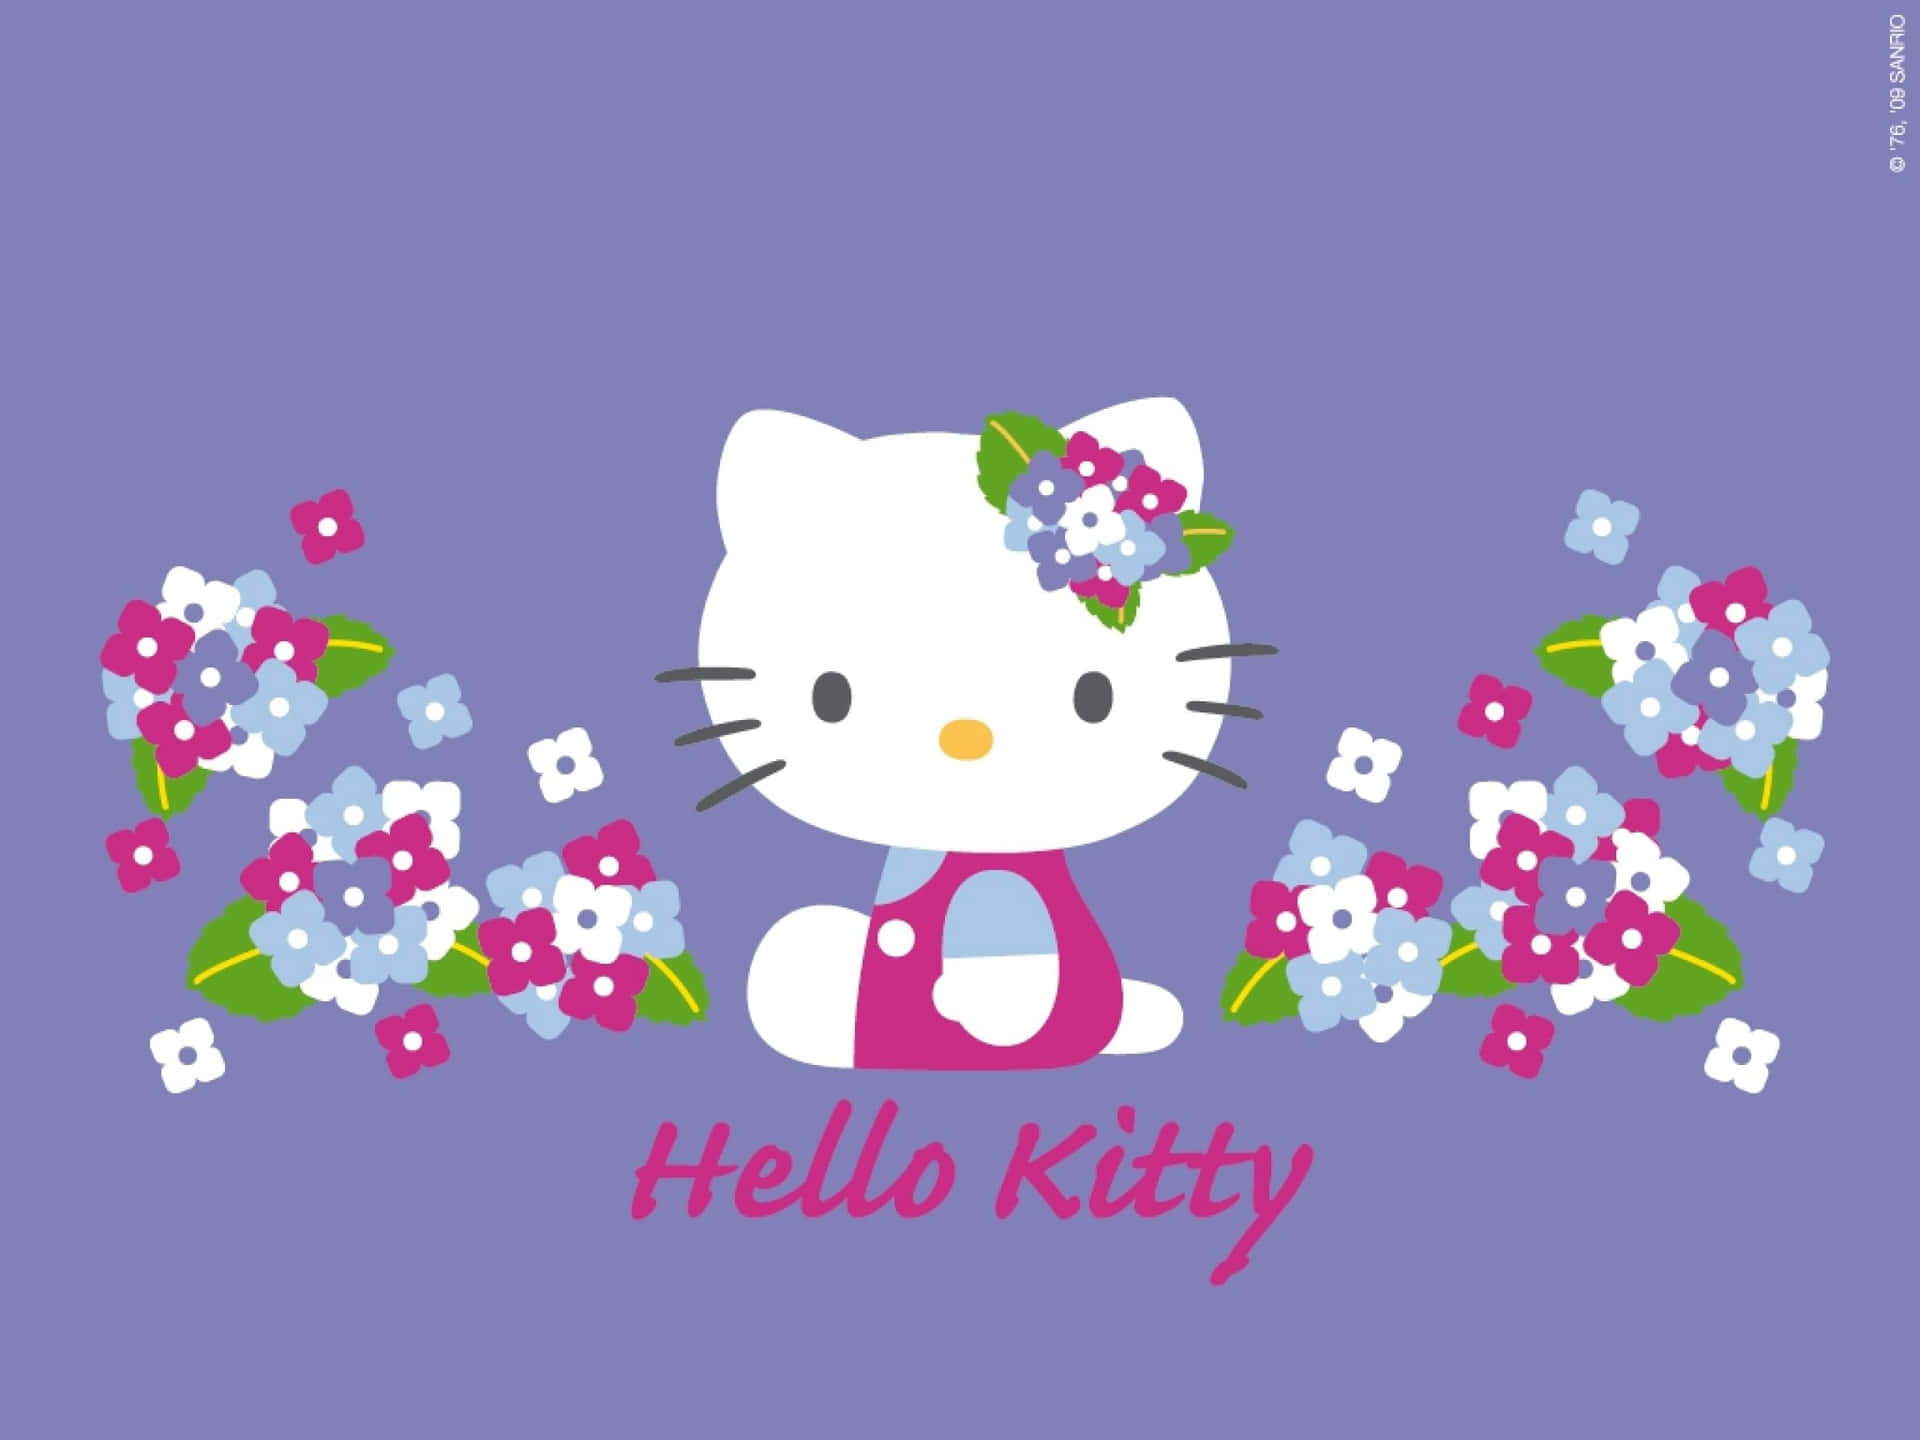 "Upgrade Your Computer with a Hello Kitty PC!" Wallpaper